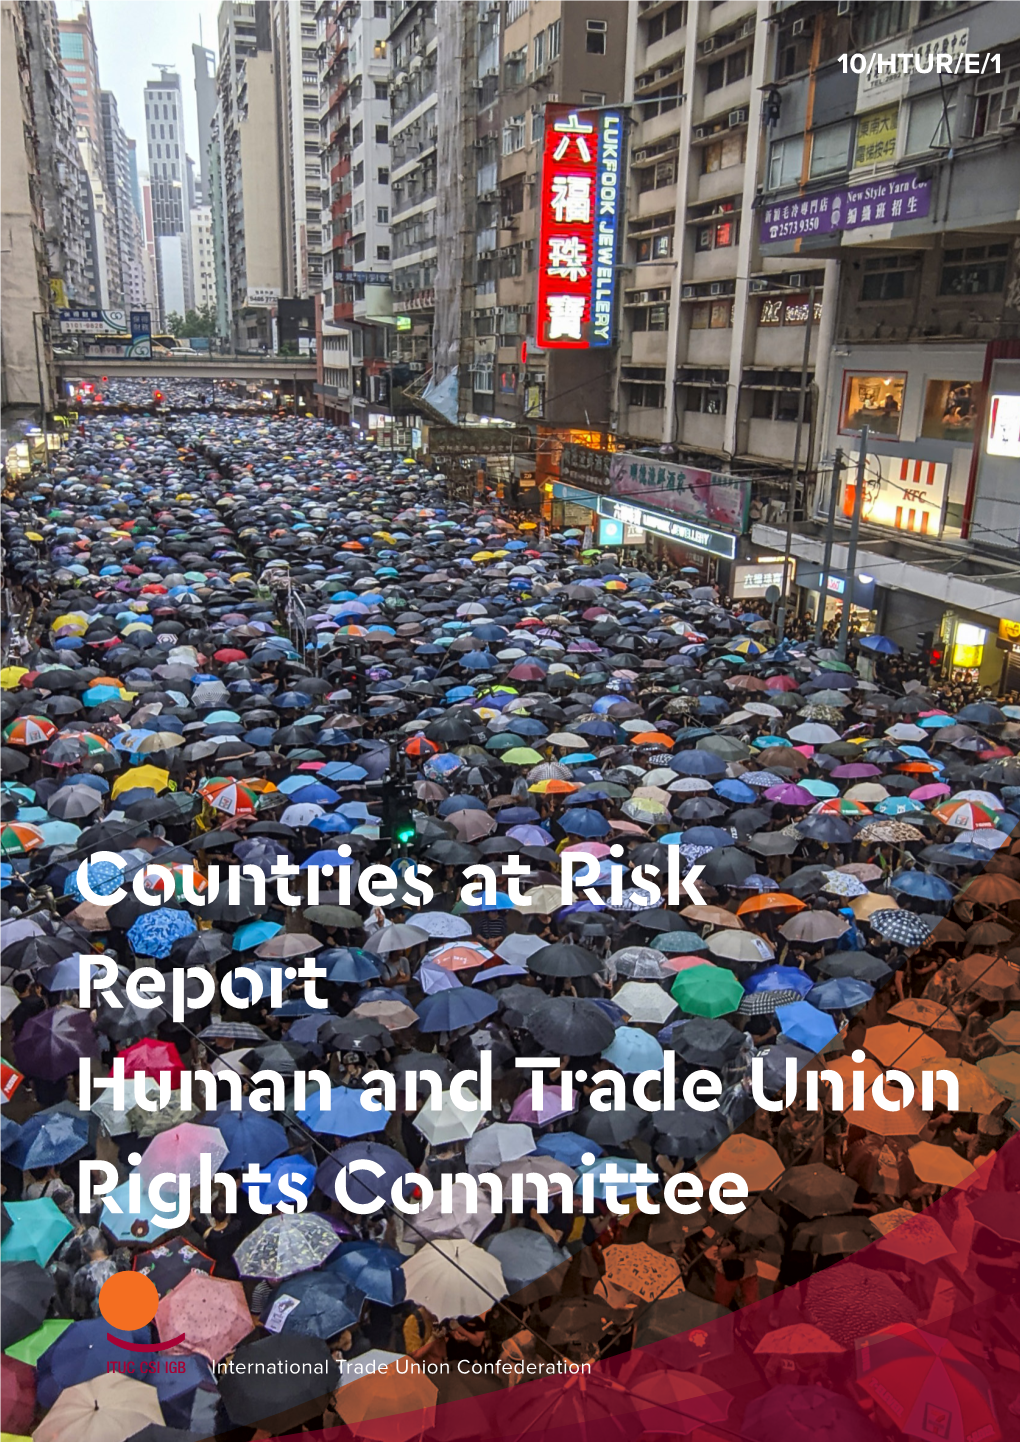 Countries at Risk Report Human and Trade Union Rights Committee